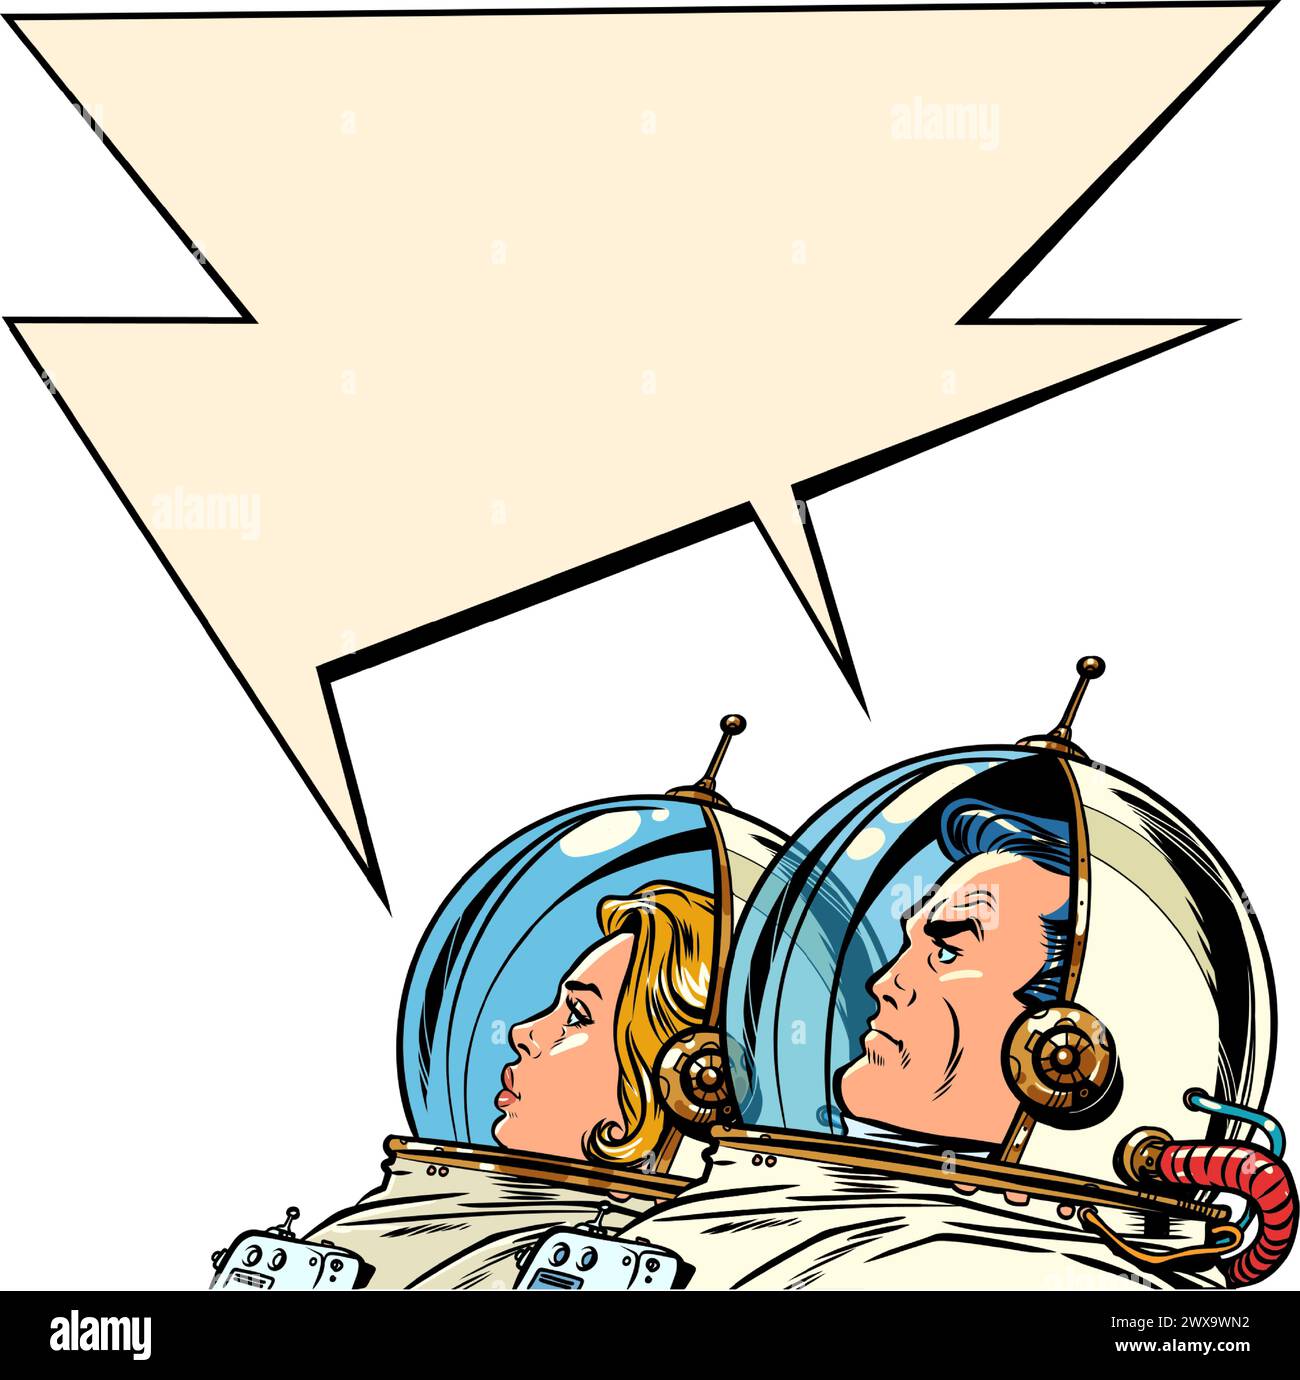 The astronauts communicate with each other in comic style. Cooperation in space exploration. Cosmic discounts on Black Friday. Pop Art Retro Vector Il Stock Vector